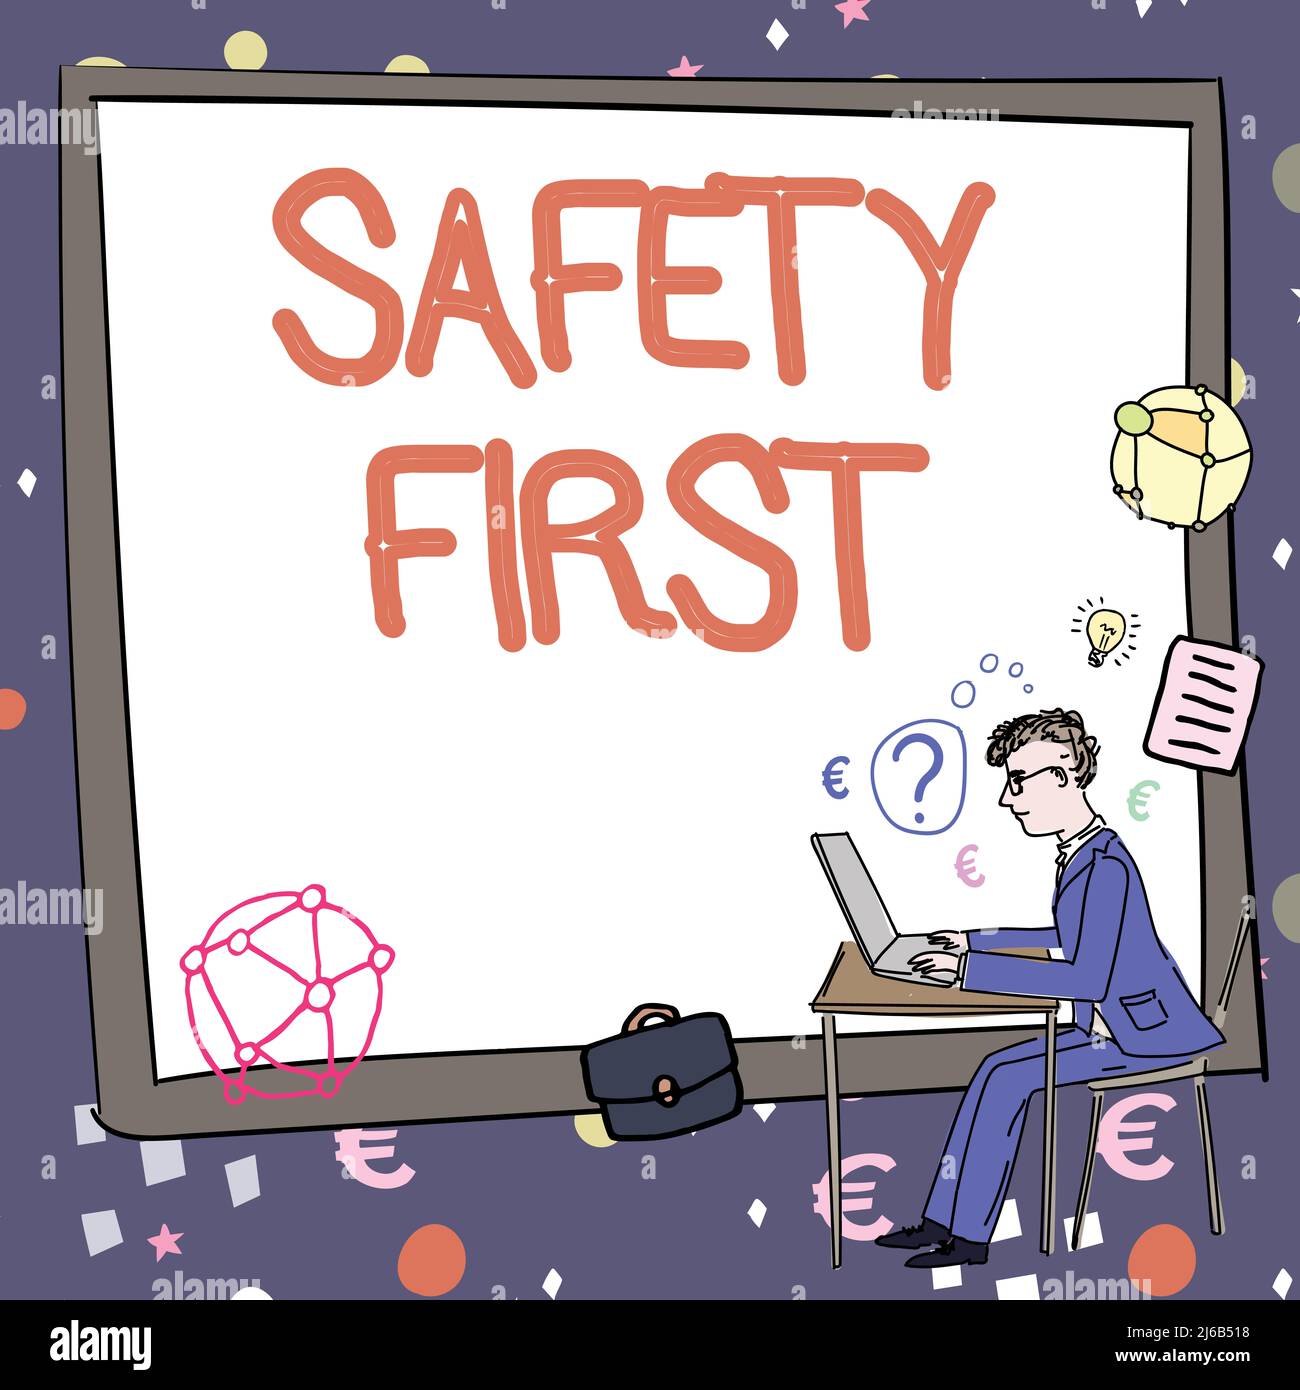 Text caption presenting Safety First. Business concept Avoid any unnecessary risk Live Safely Be Careful Pay attention Man working on computer Stock Photo